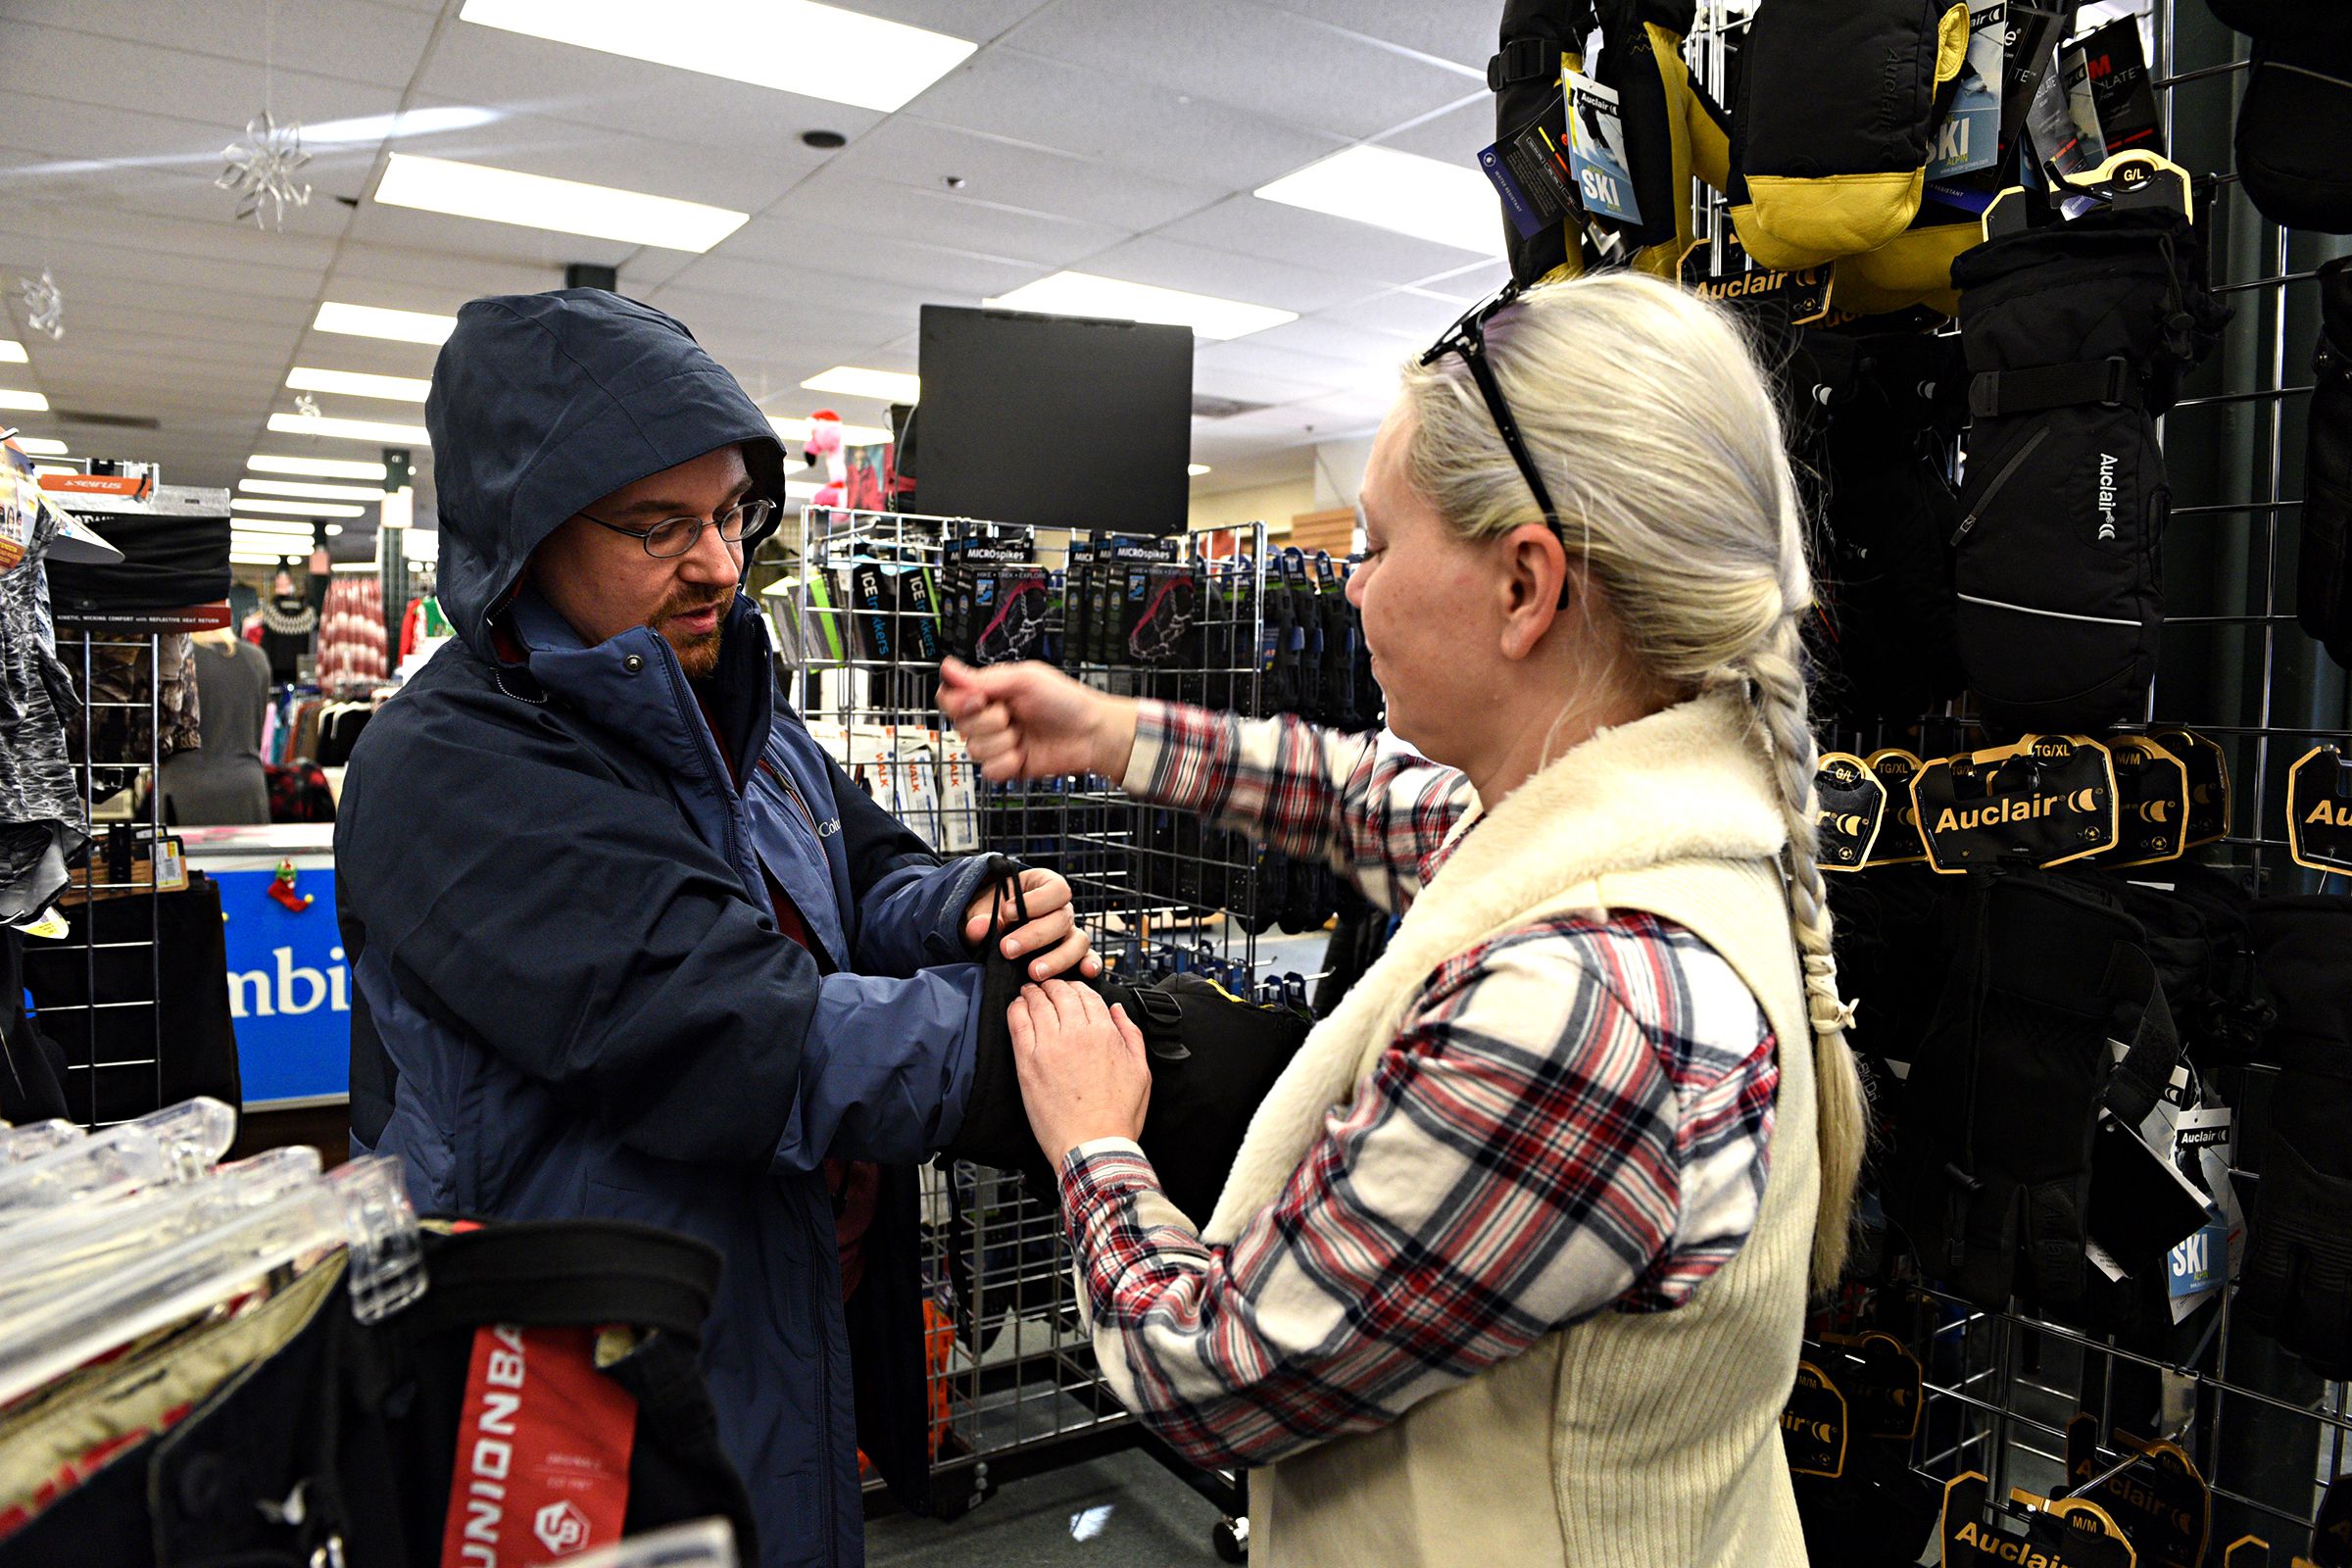 Amber Grantham, of Sunapee, N.H., helps her friend Dustin Springer, of Claremont, N.H., into new ski gear at Hubert's in Lebanon, N.H., on Saturday, Dec. 28, 2019. Grantham is teaching Springer to ski, starting with helping him pick out winter gear. (Valley News - Jennifer Hauck) Copyright Valley News. May not be reprinted or used online without permission. Send requests to permission@vnews.com.